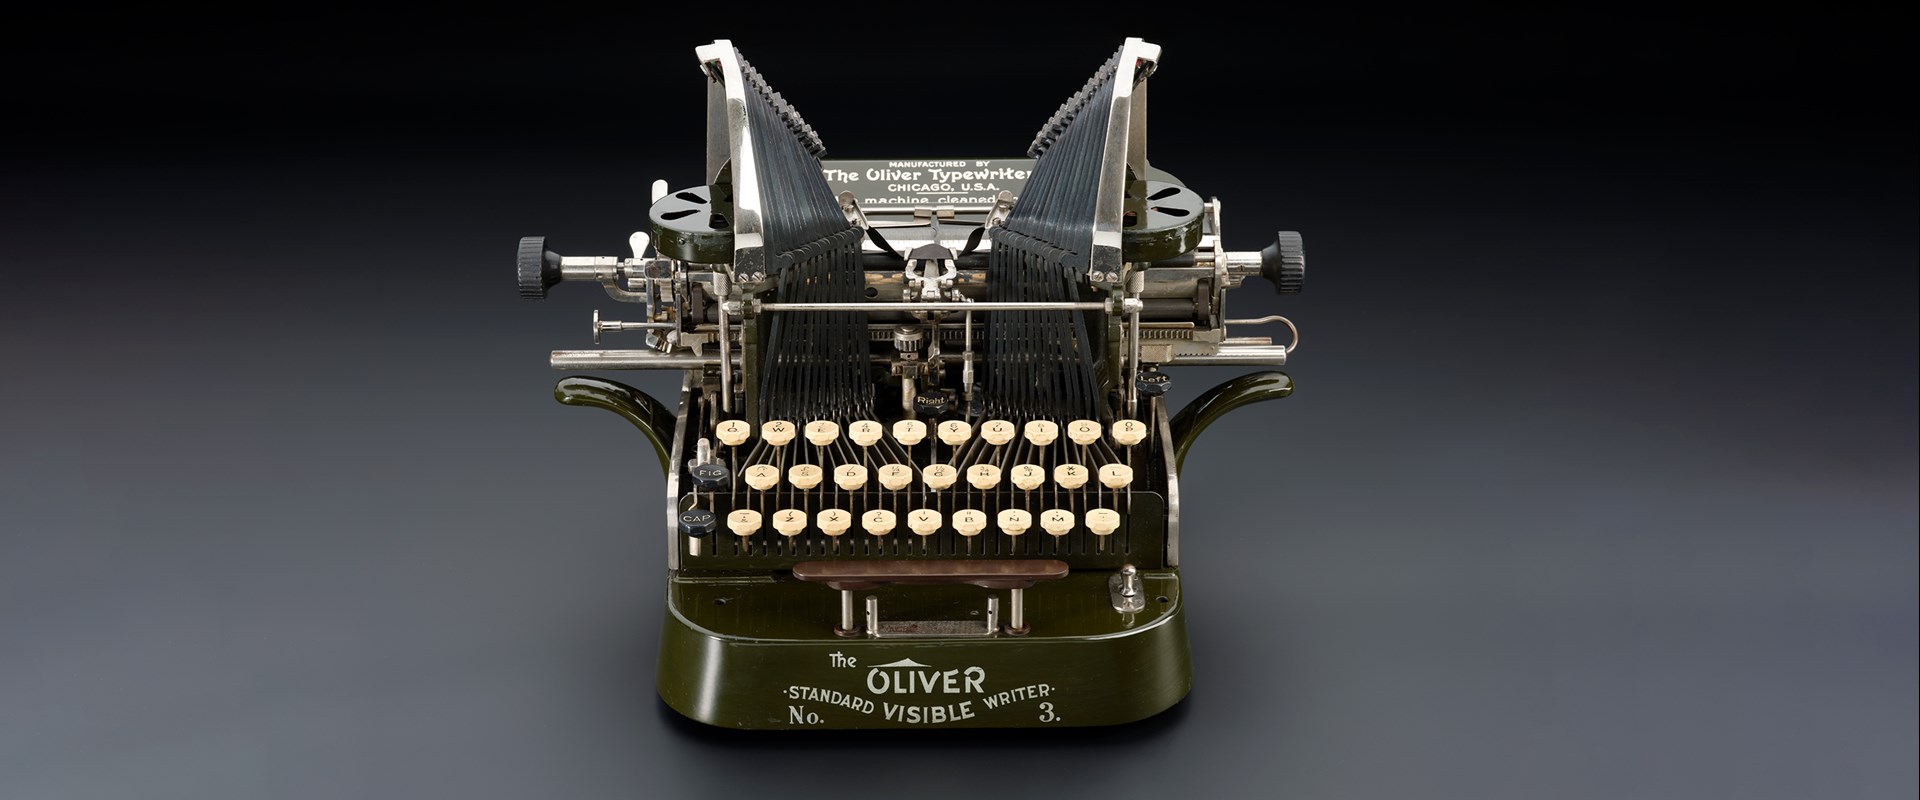 Green mechanical typewriter from the early 1900s with white keys. It says 'The Oliver No. 3, Standard Visible Writer' on the front.